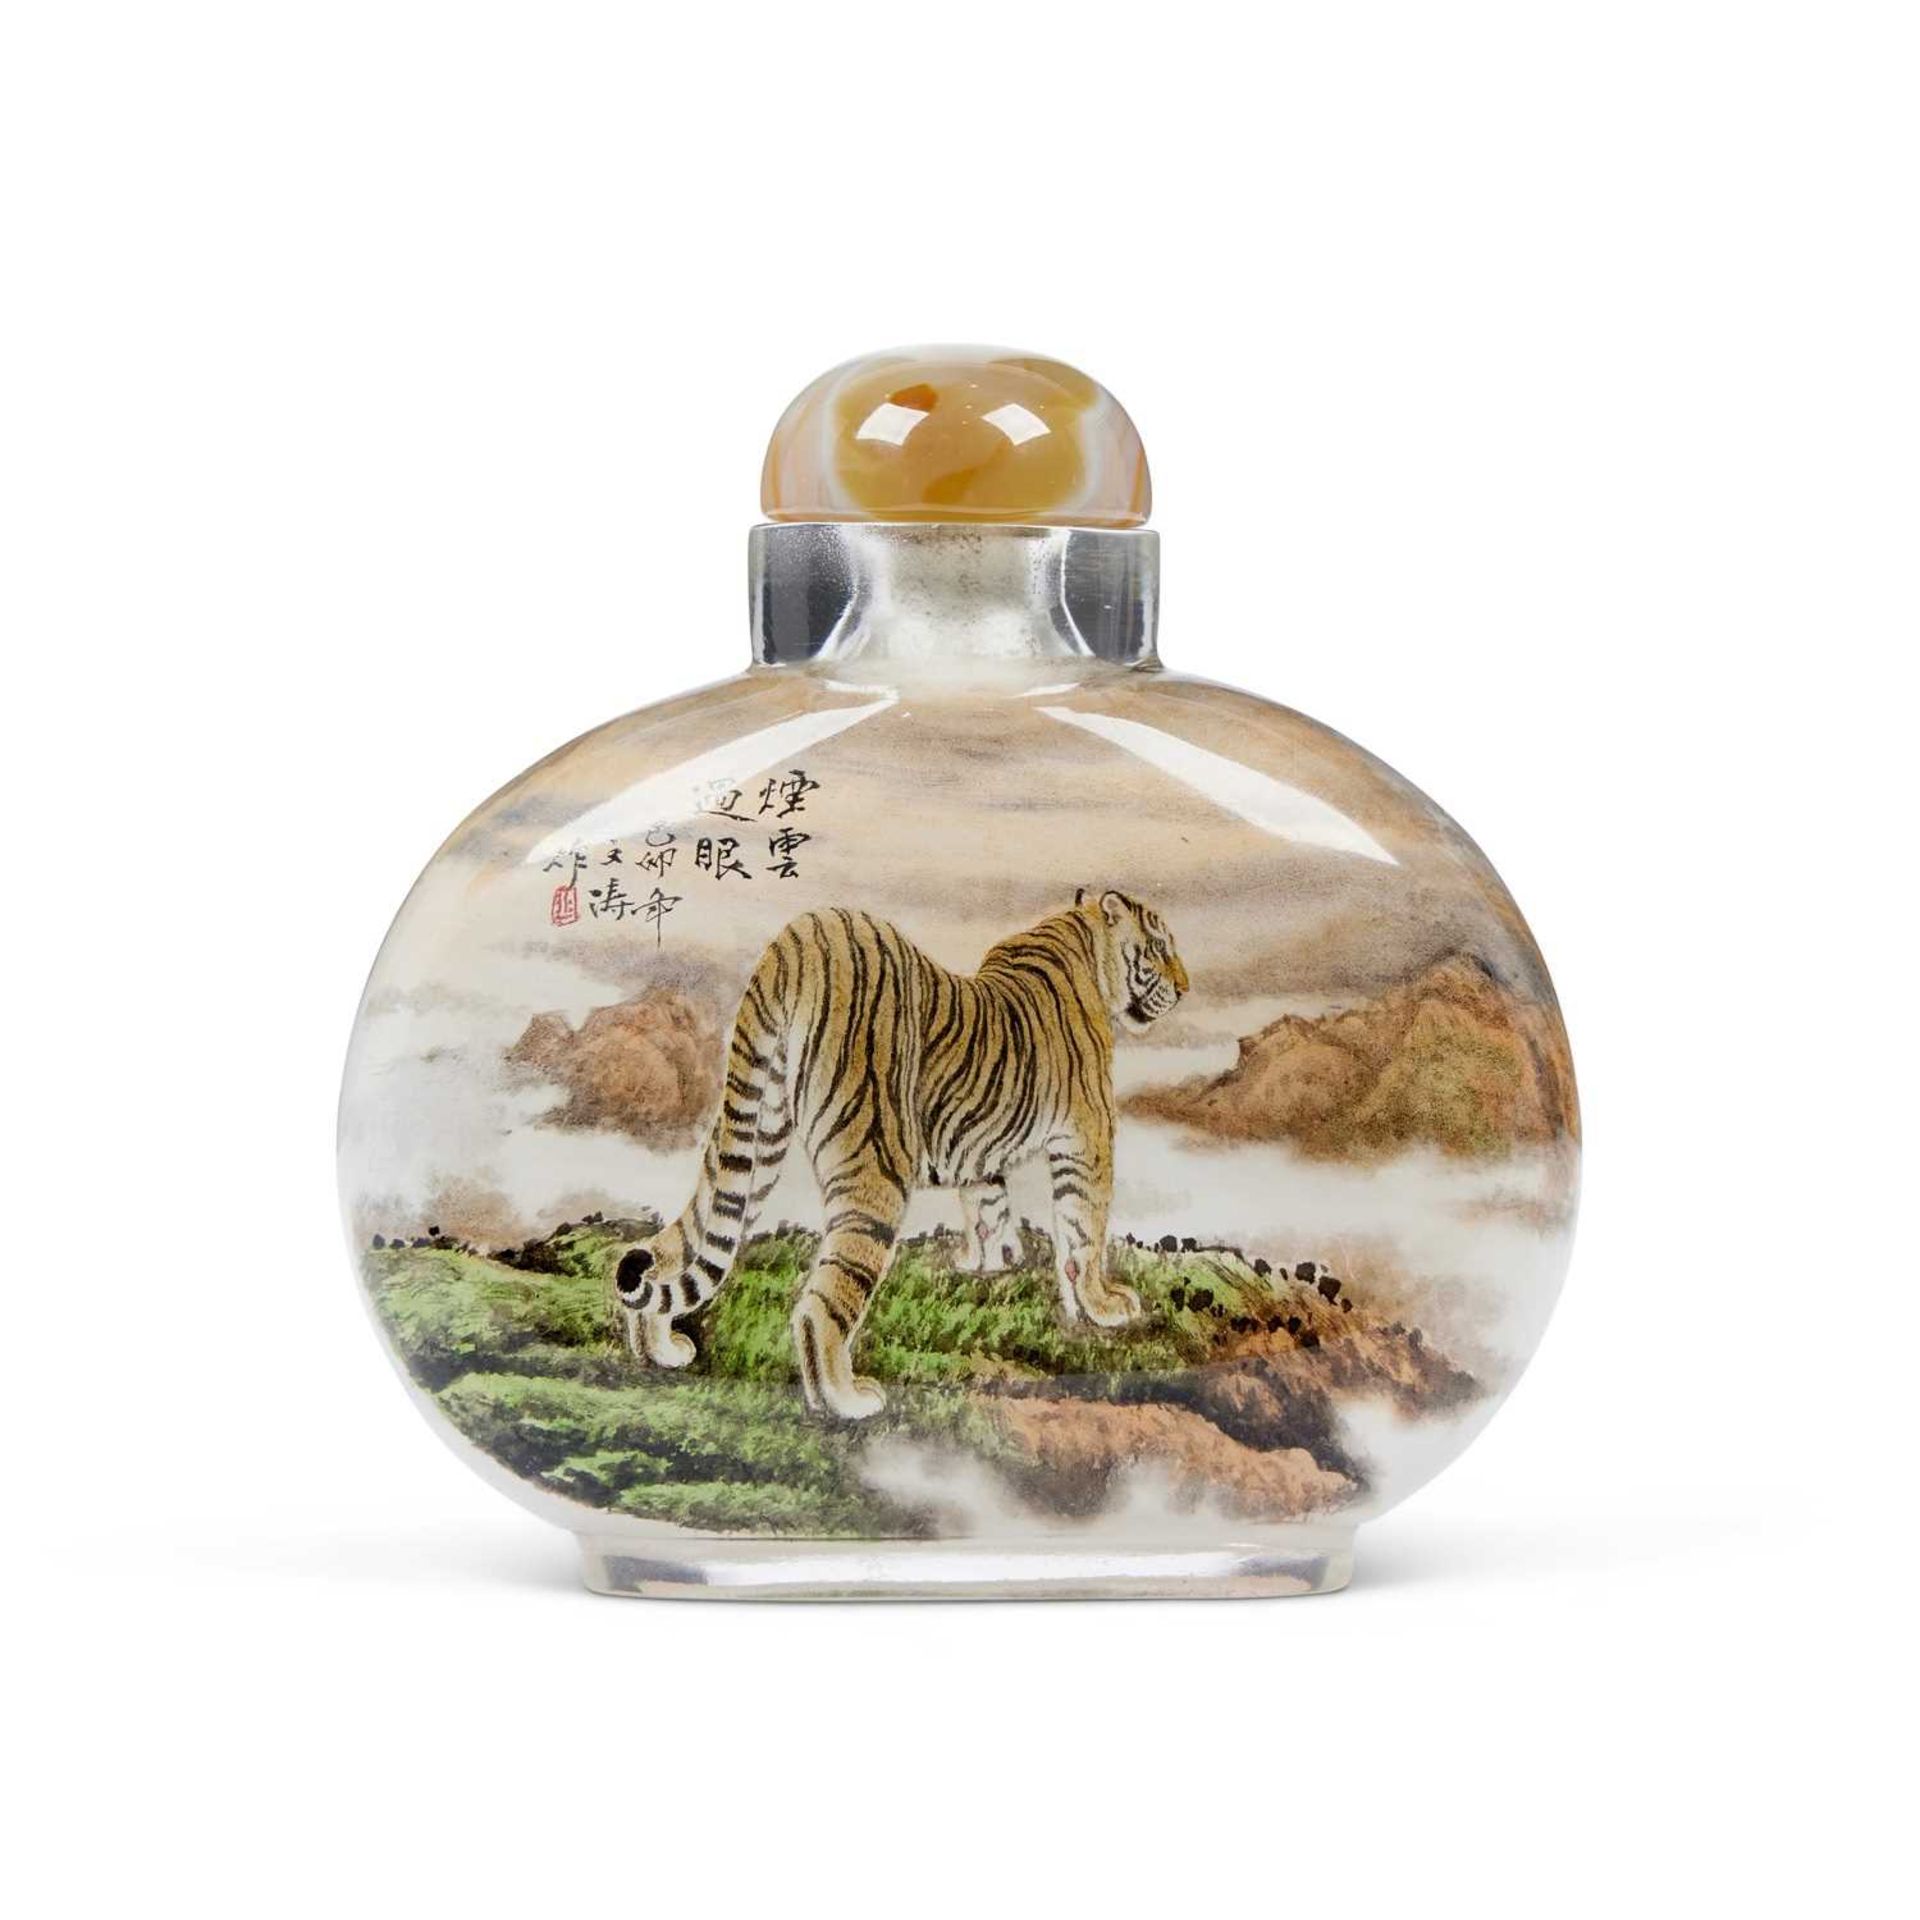 A CHINESE REVERSE GLASS PAINTED SNUFF BOTTLE DECORATED WITH A TIGER - Image 2 of 2